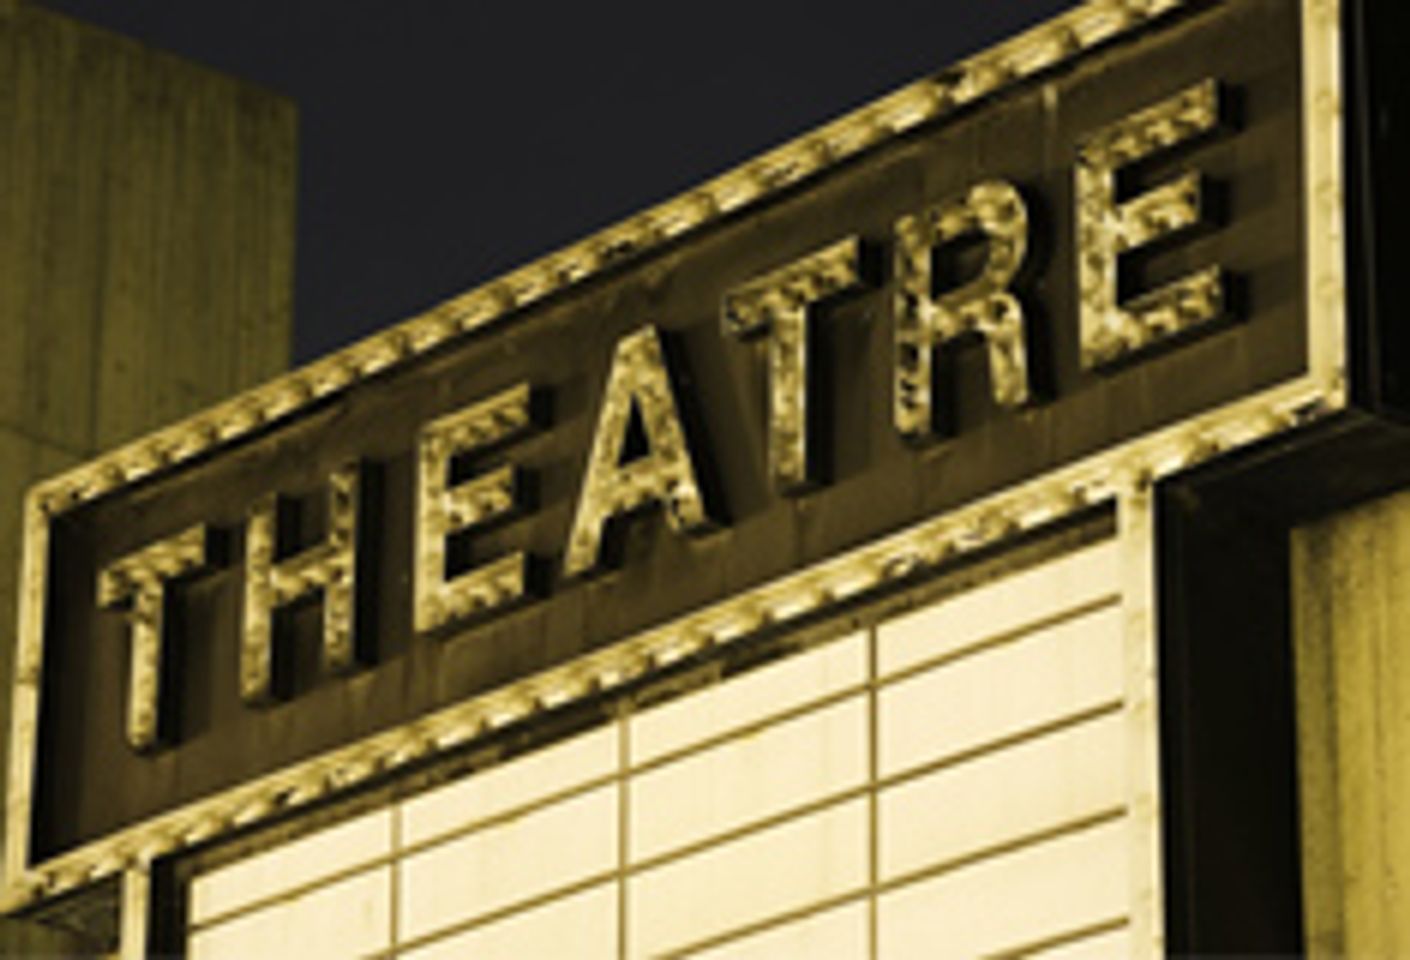 Adult Theater Raid in Atlanta Airs on Local News